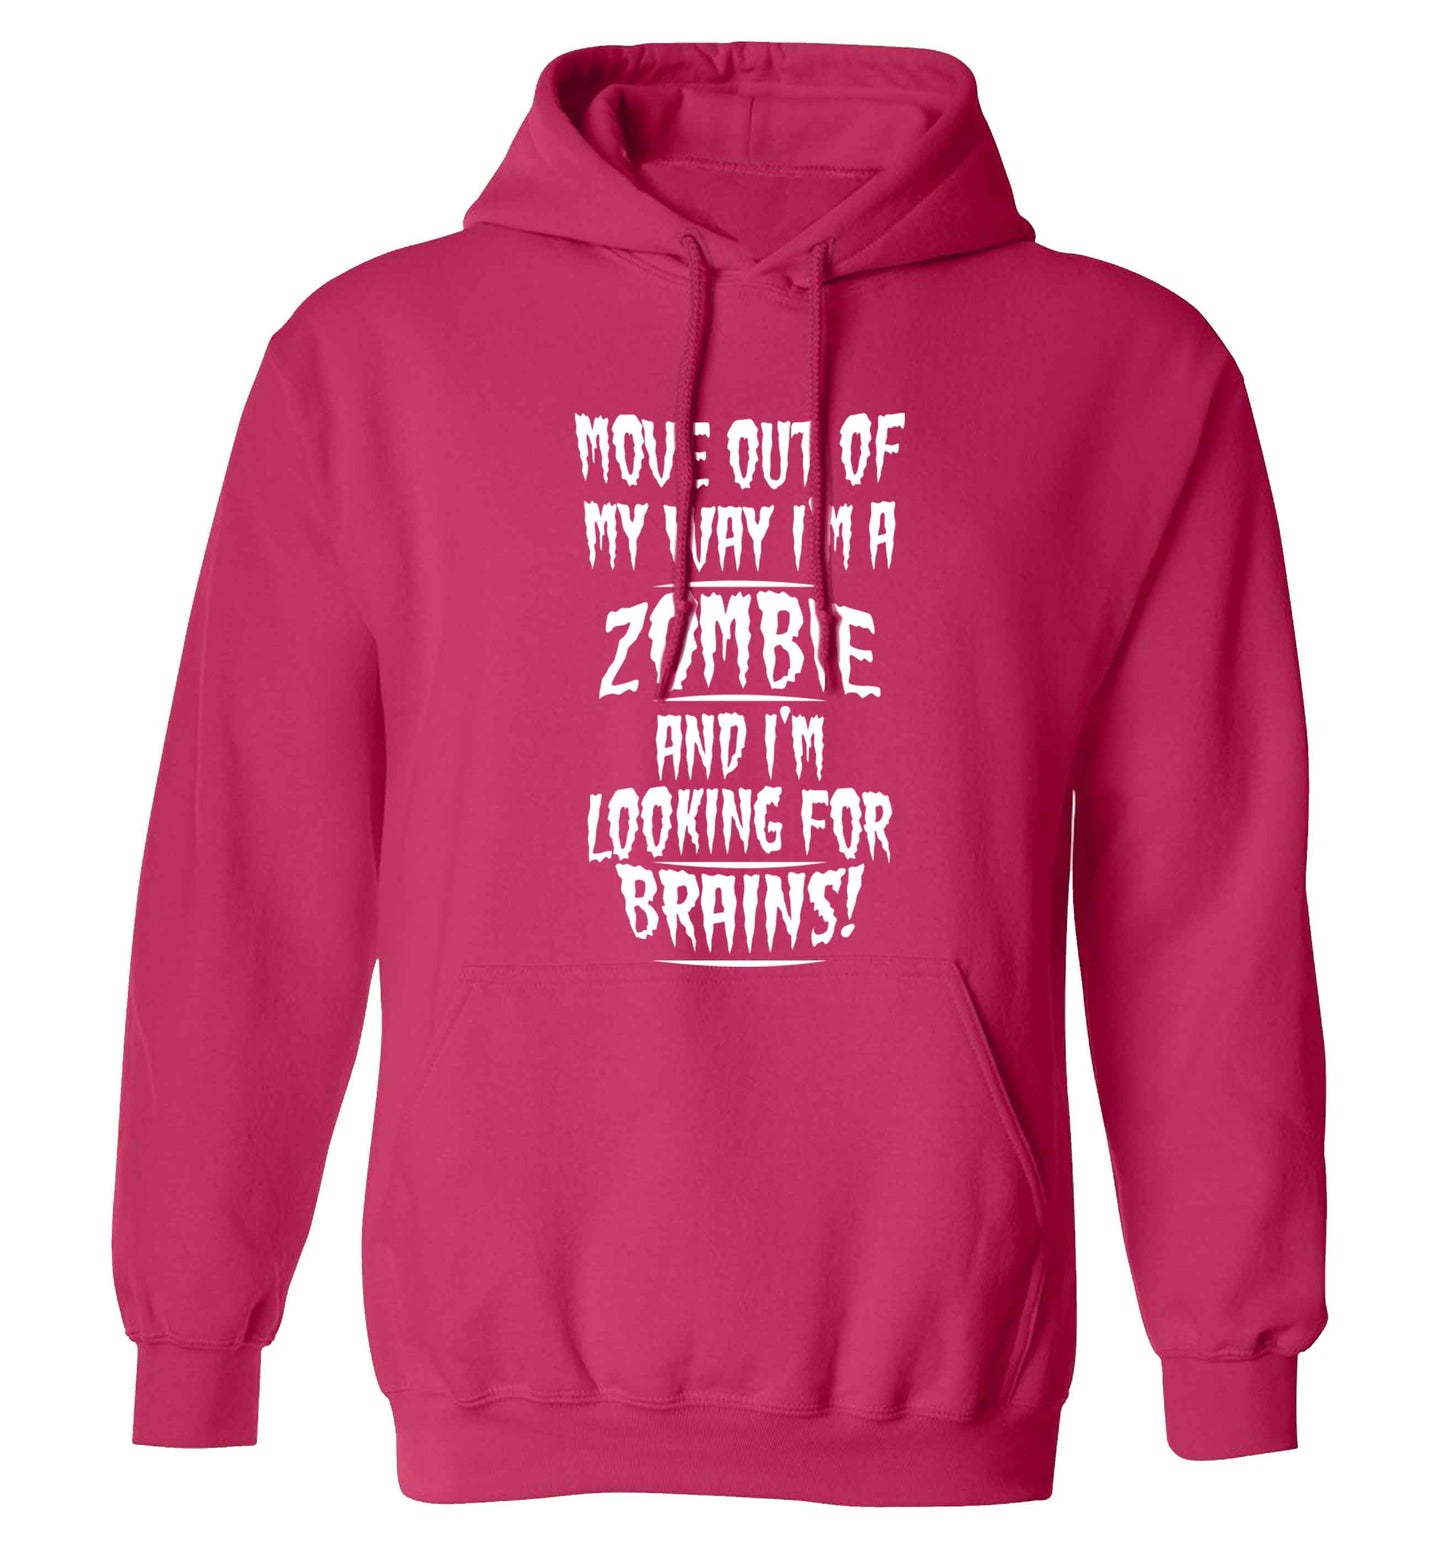 I'm a zombie and I'm looking for brains! adults unisex pink hoodie 2XL